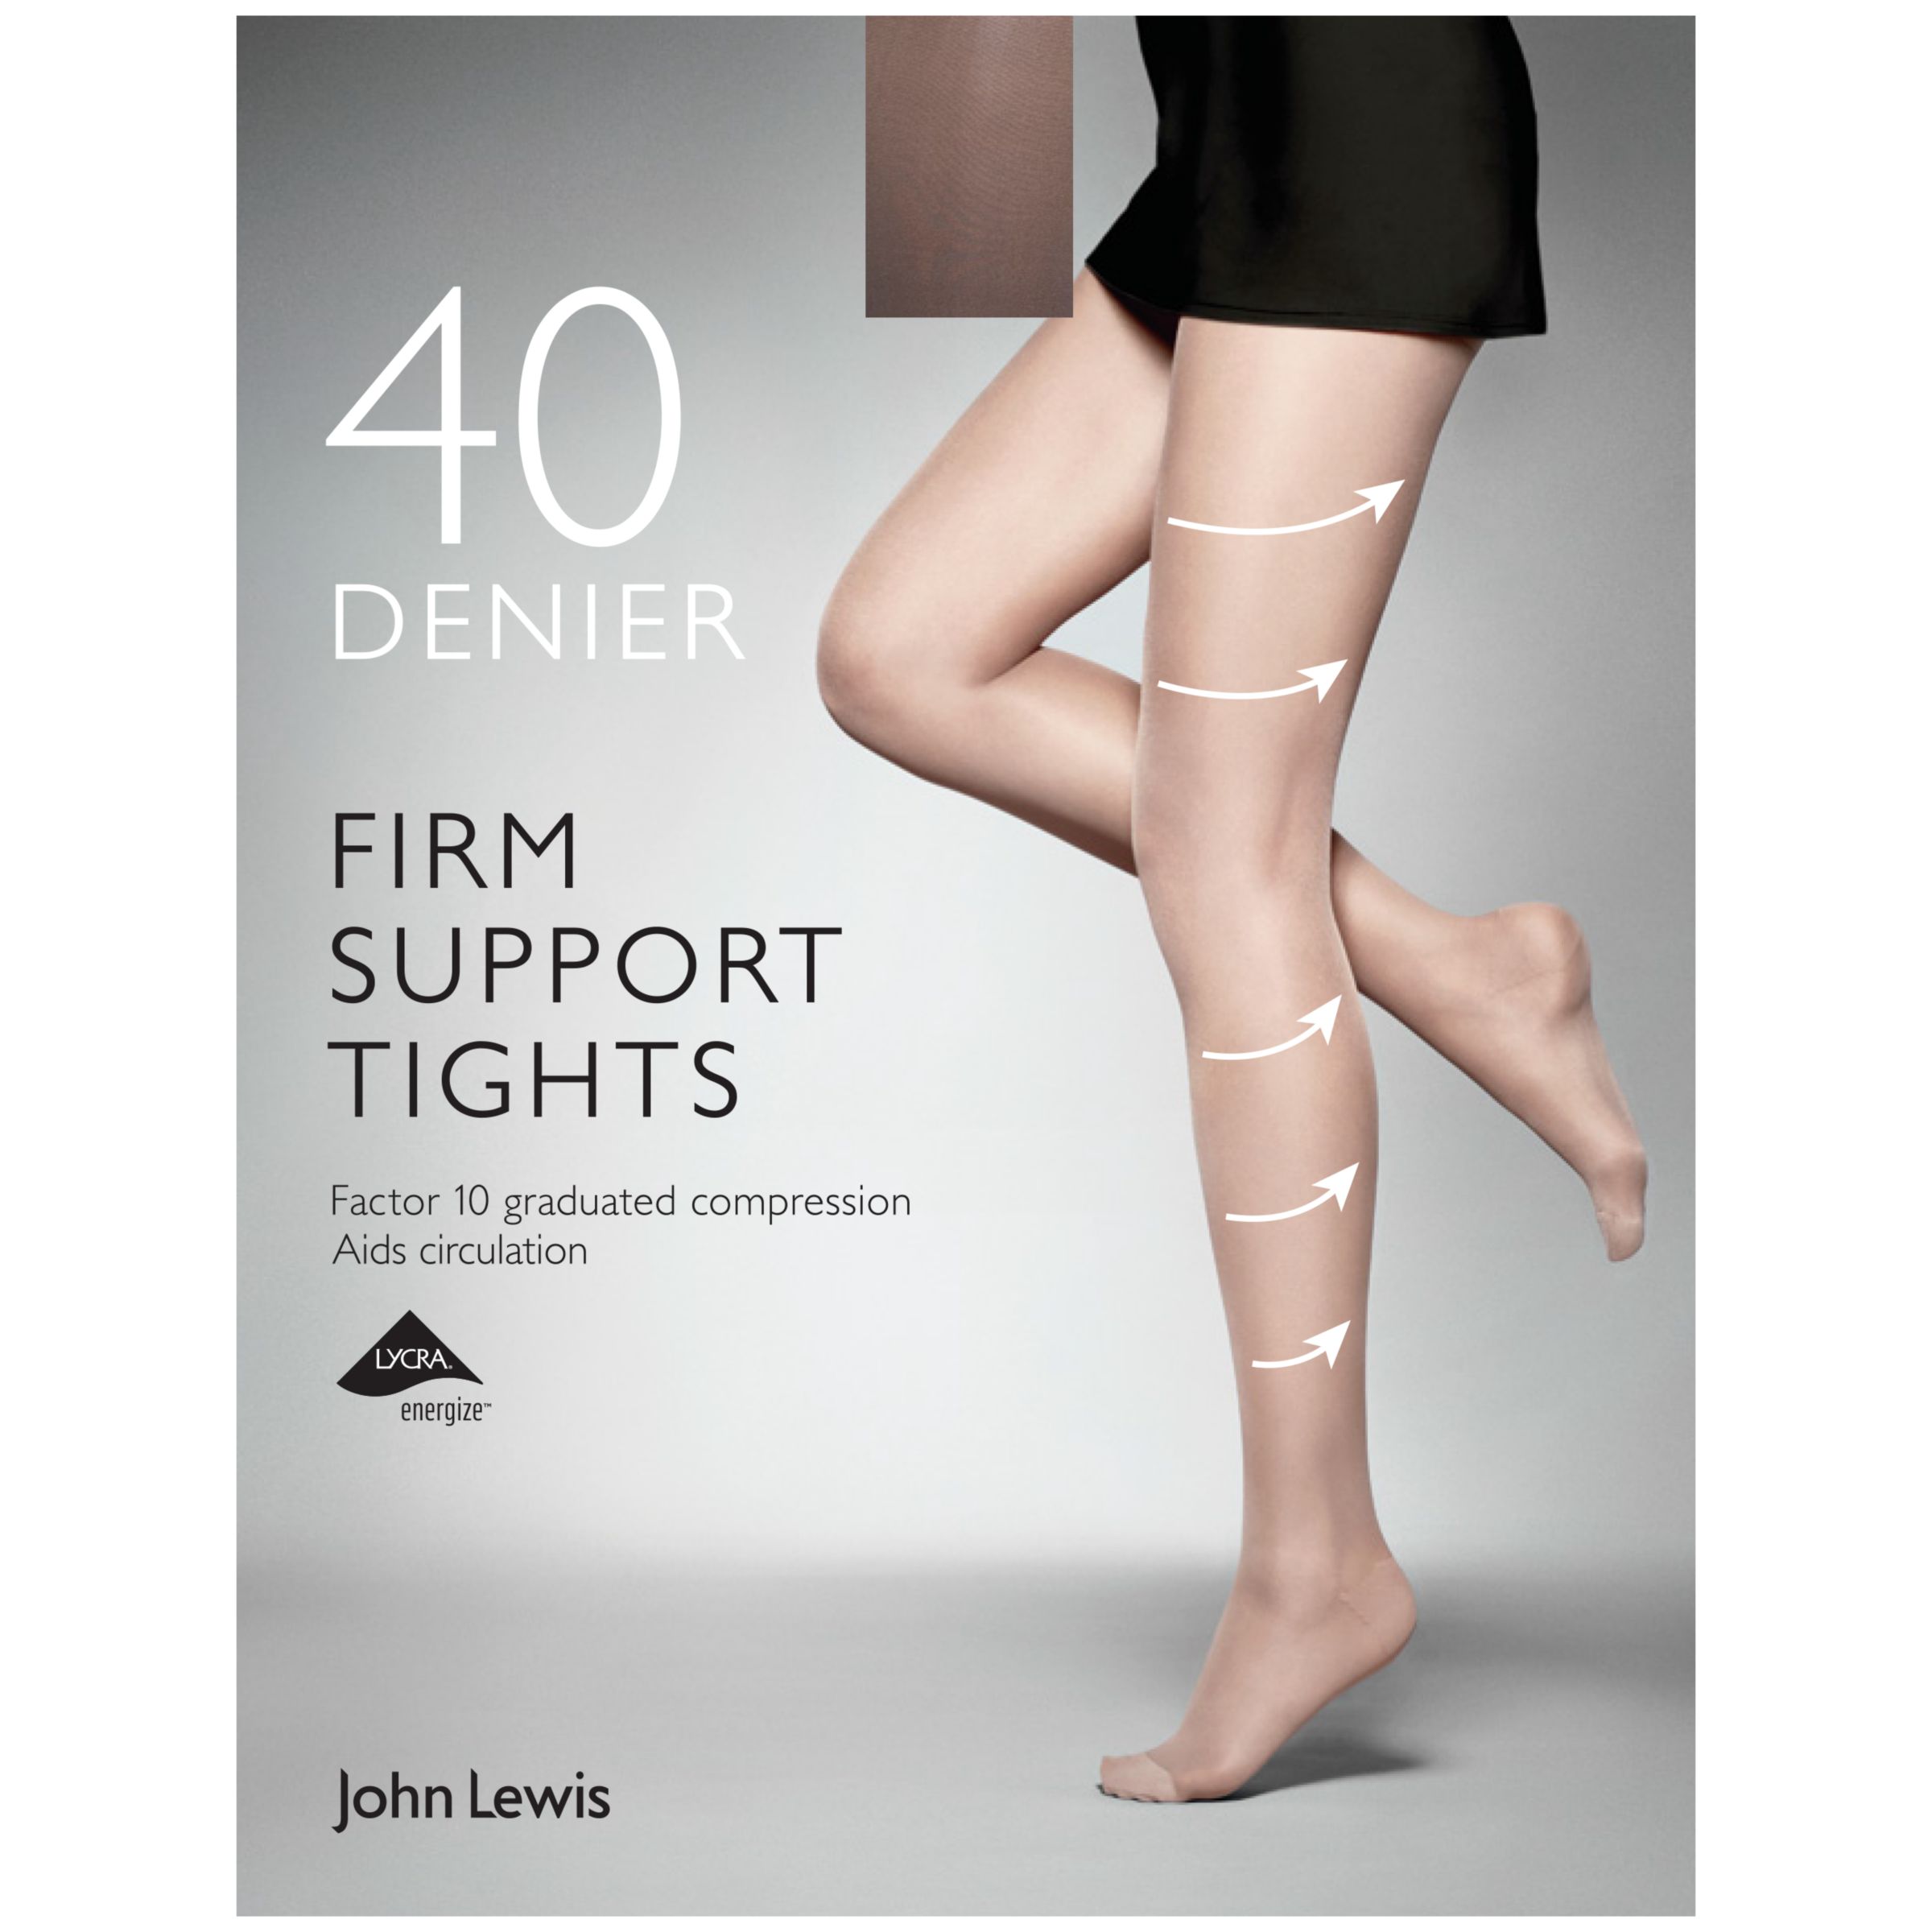 John Lewis 40 Denier Firm Support Tights, Nearly Black, M